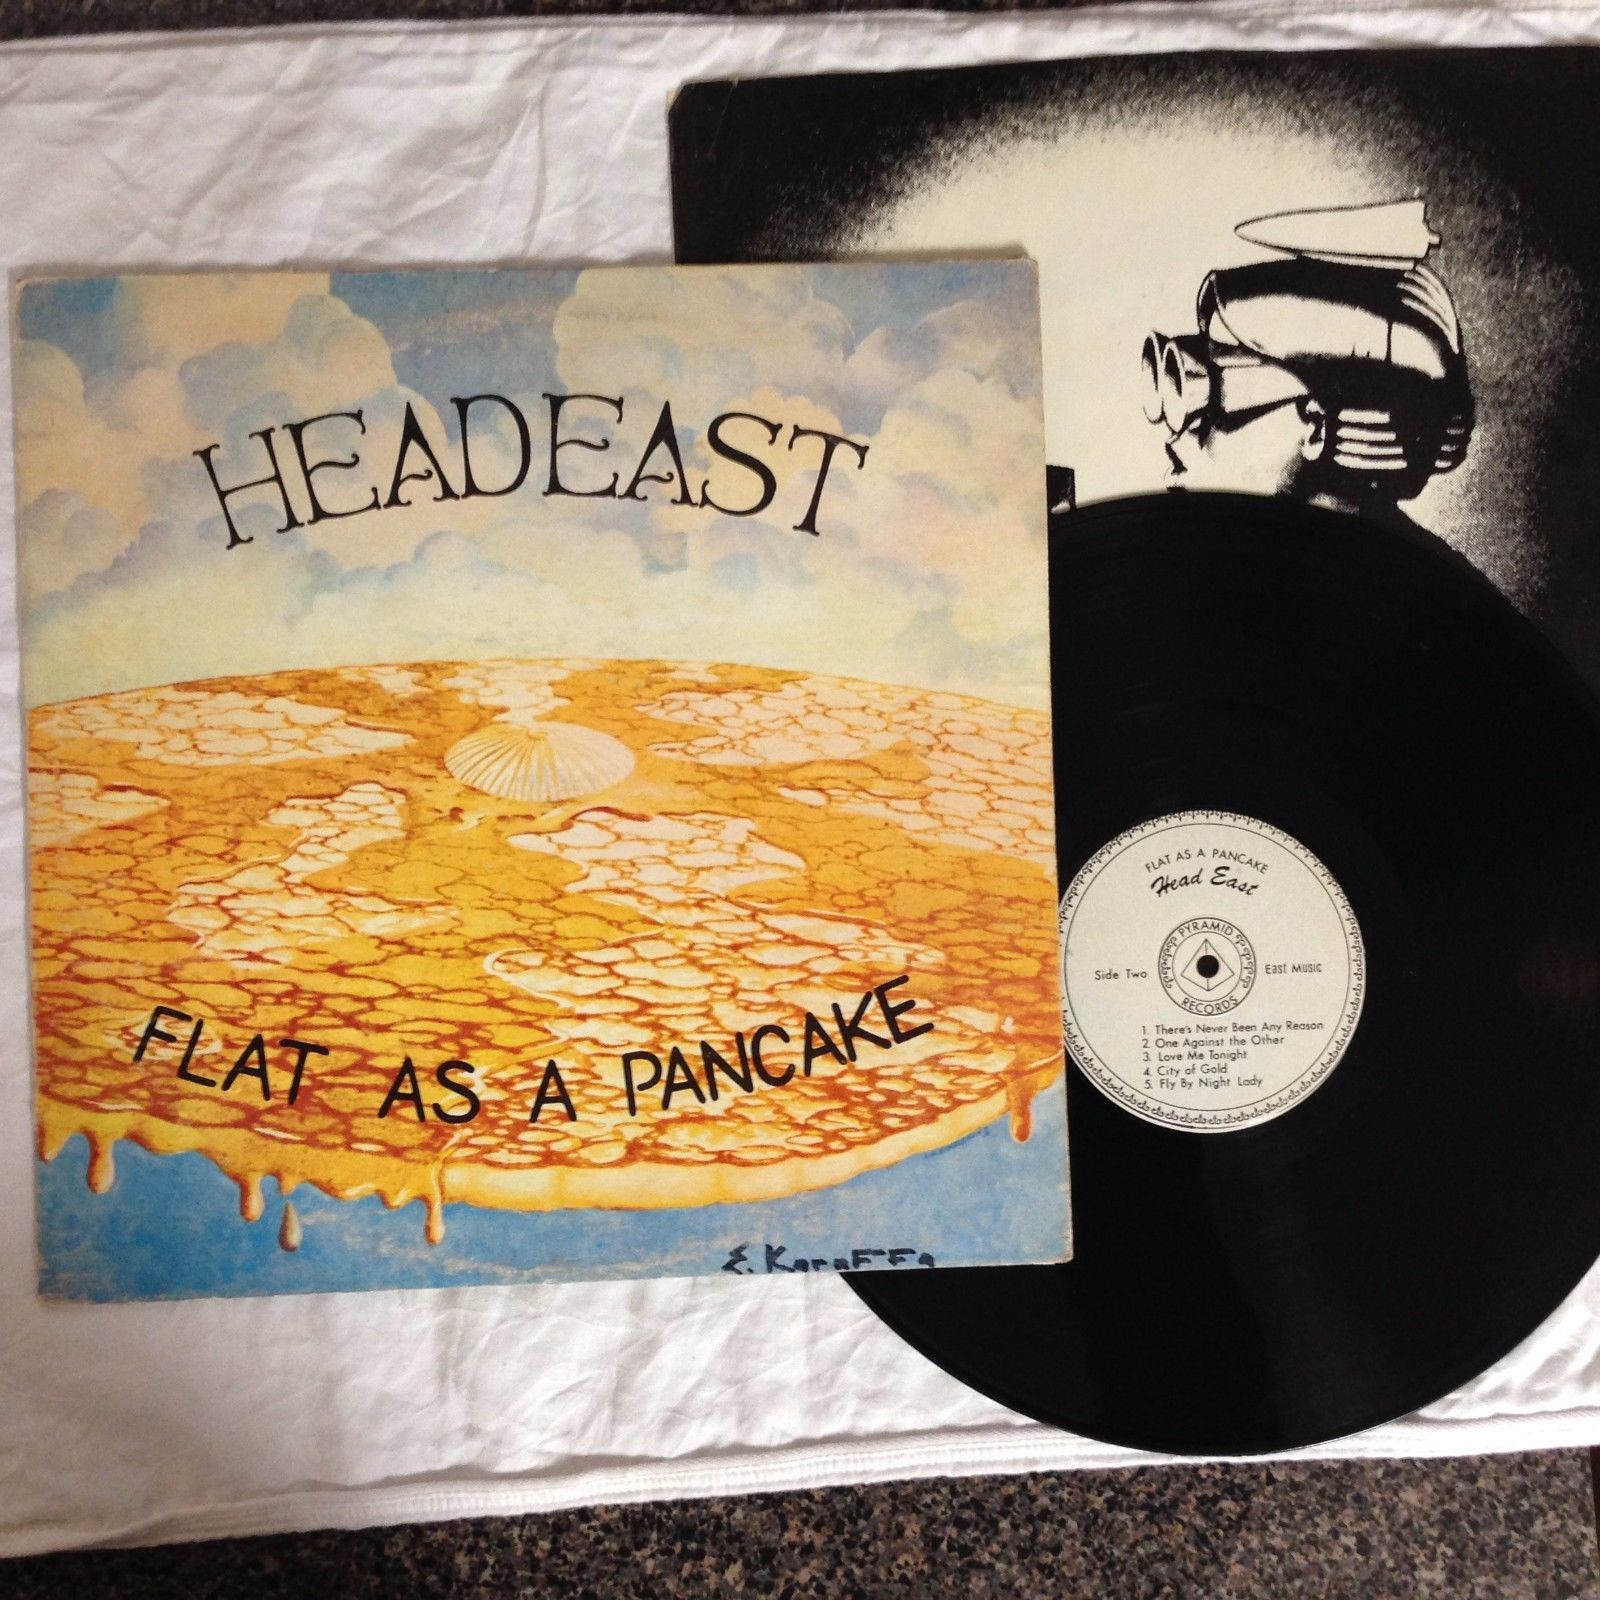  - Head East - Flat As A Pancake LP - ORIG Pyramid Label ONLY  5,000 EVER PRESSED - auction details